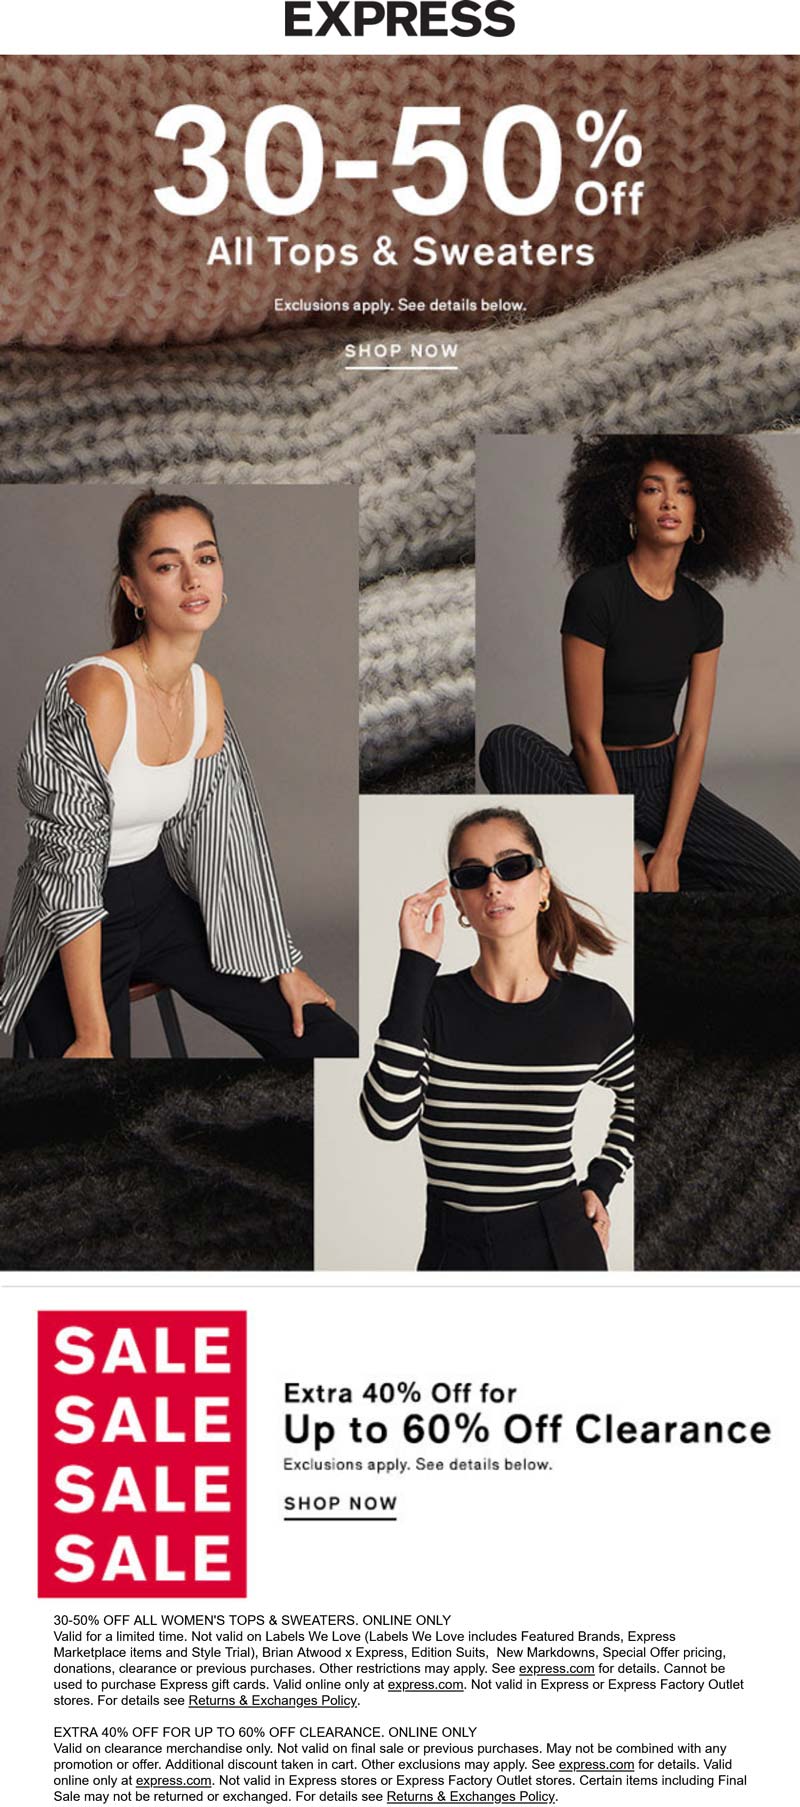 Express stores Coupon  30-50% off all tops & sweaters online at Express #express 